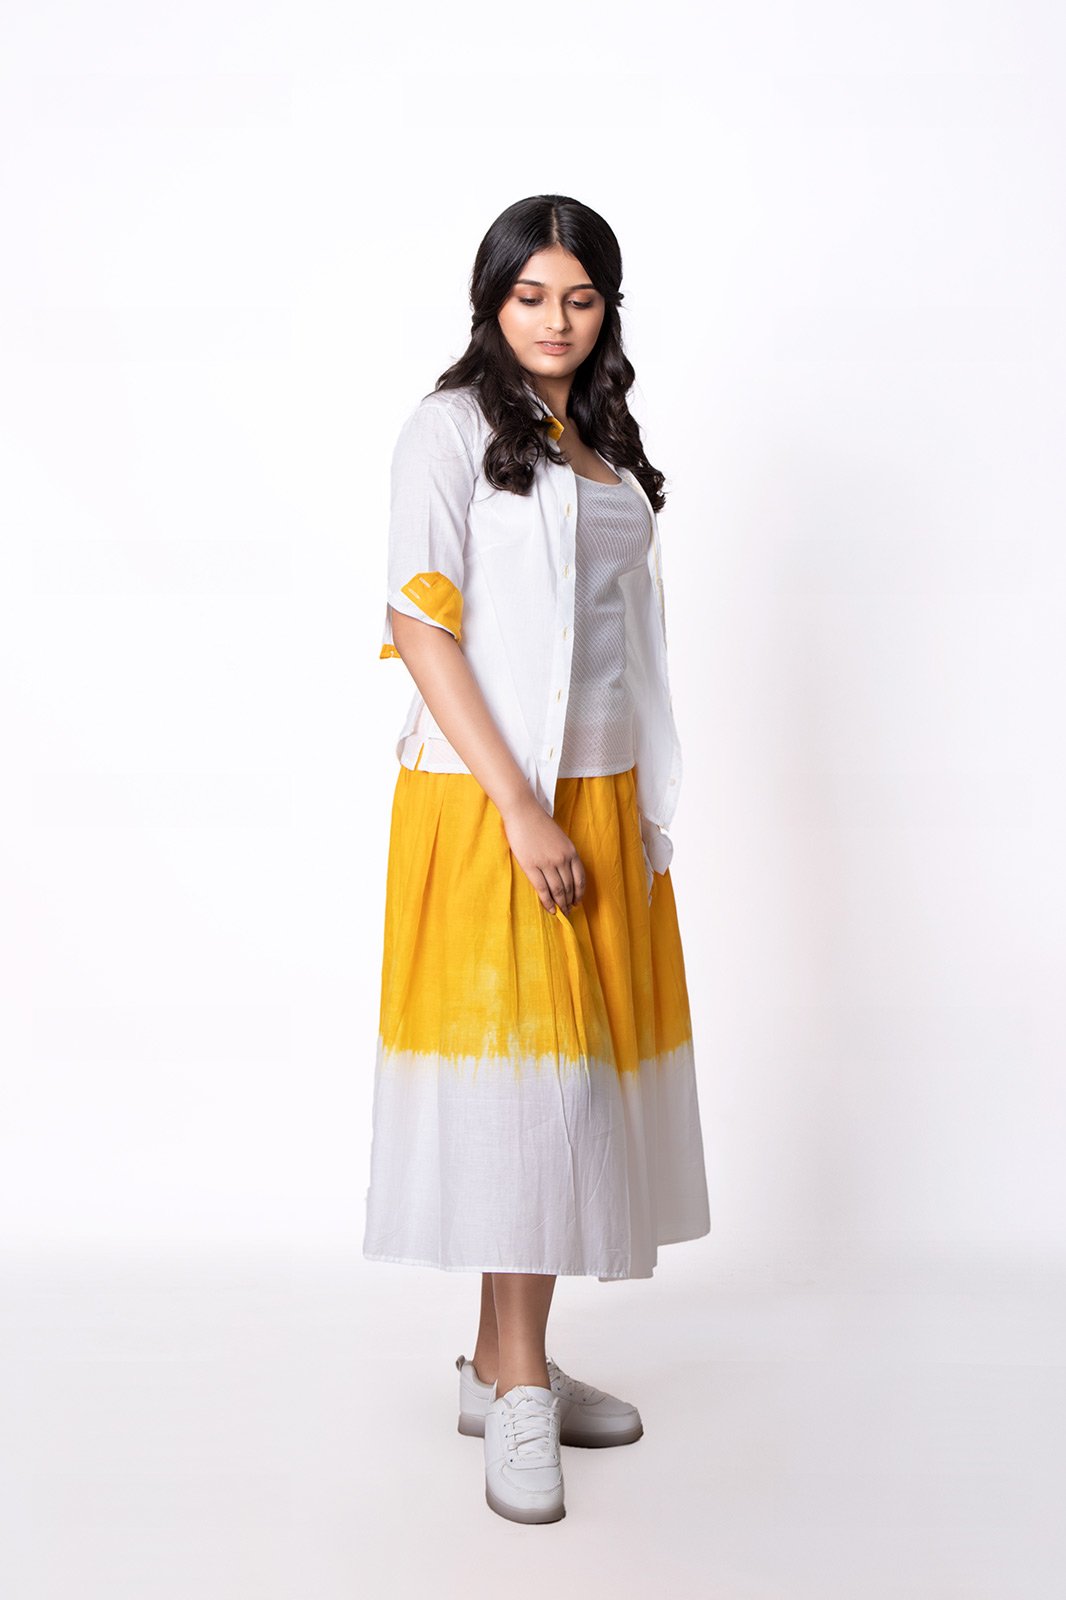 Sintra Yellow Tie Dye Cotton Skirt, Best Organic Clothing Store, Sepia stories, organic cotton, sustainable fashion, organic fashion brands, handmade organic clothing, organic handmade clothing, alternate apparel, handcrafted clothing in India, organic handmade clothing, fashion labels in India, eco-friendly clothing, natural organic clothes, organic fabrics, sustainable linen clothing, natural fabric clothes, women clothing, shop women clothing, women bottoms online, women bottoms, women pants, casual pants, casual clothing, office pants, trousers, women trousers, casual trousers, trousers online, indian women pants, best women clothing brand